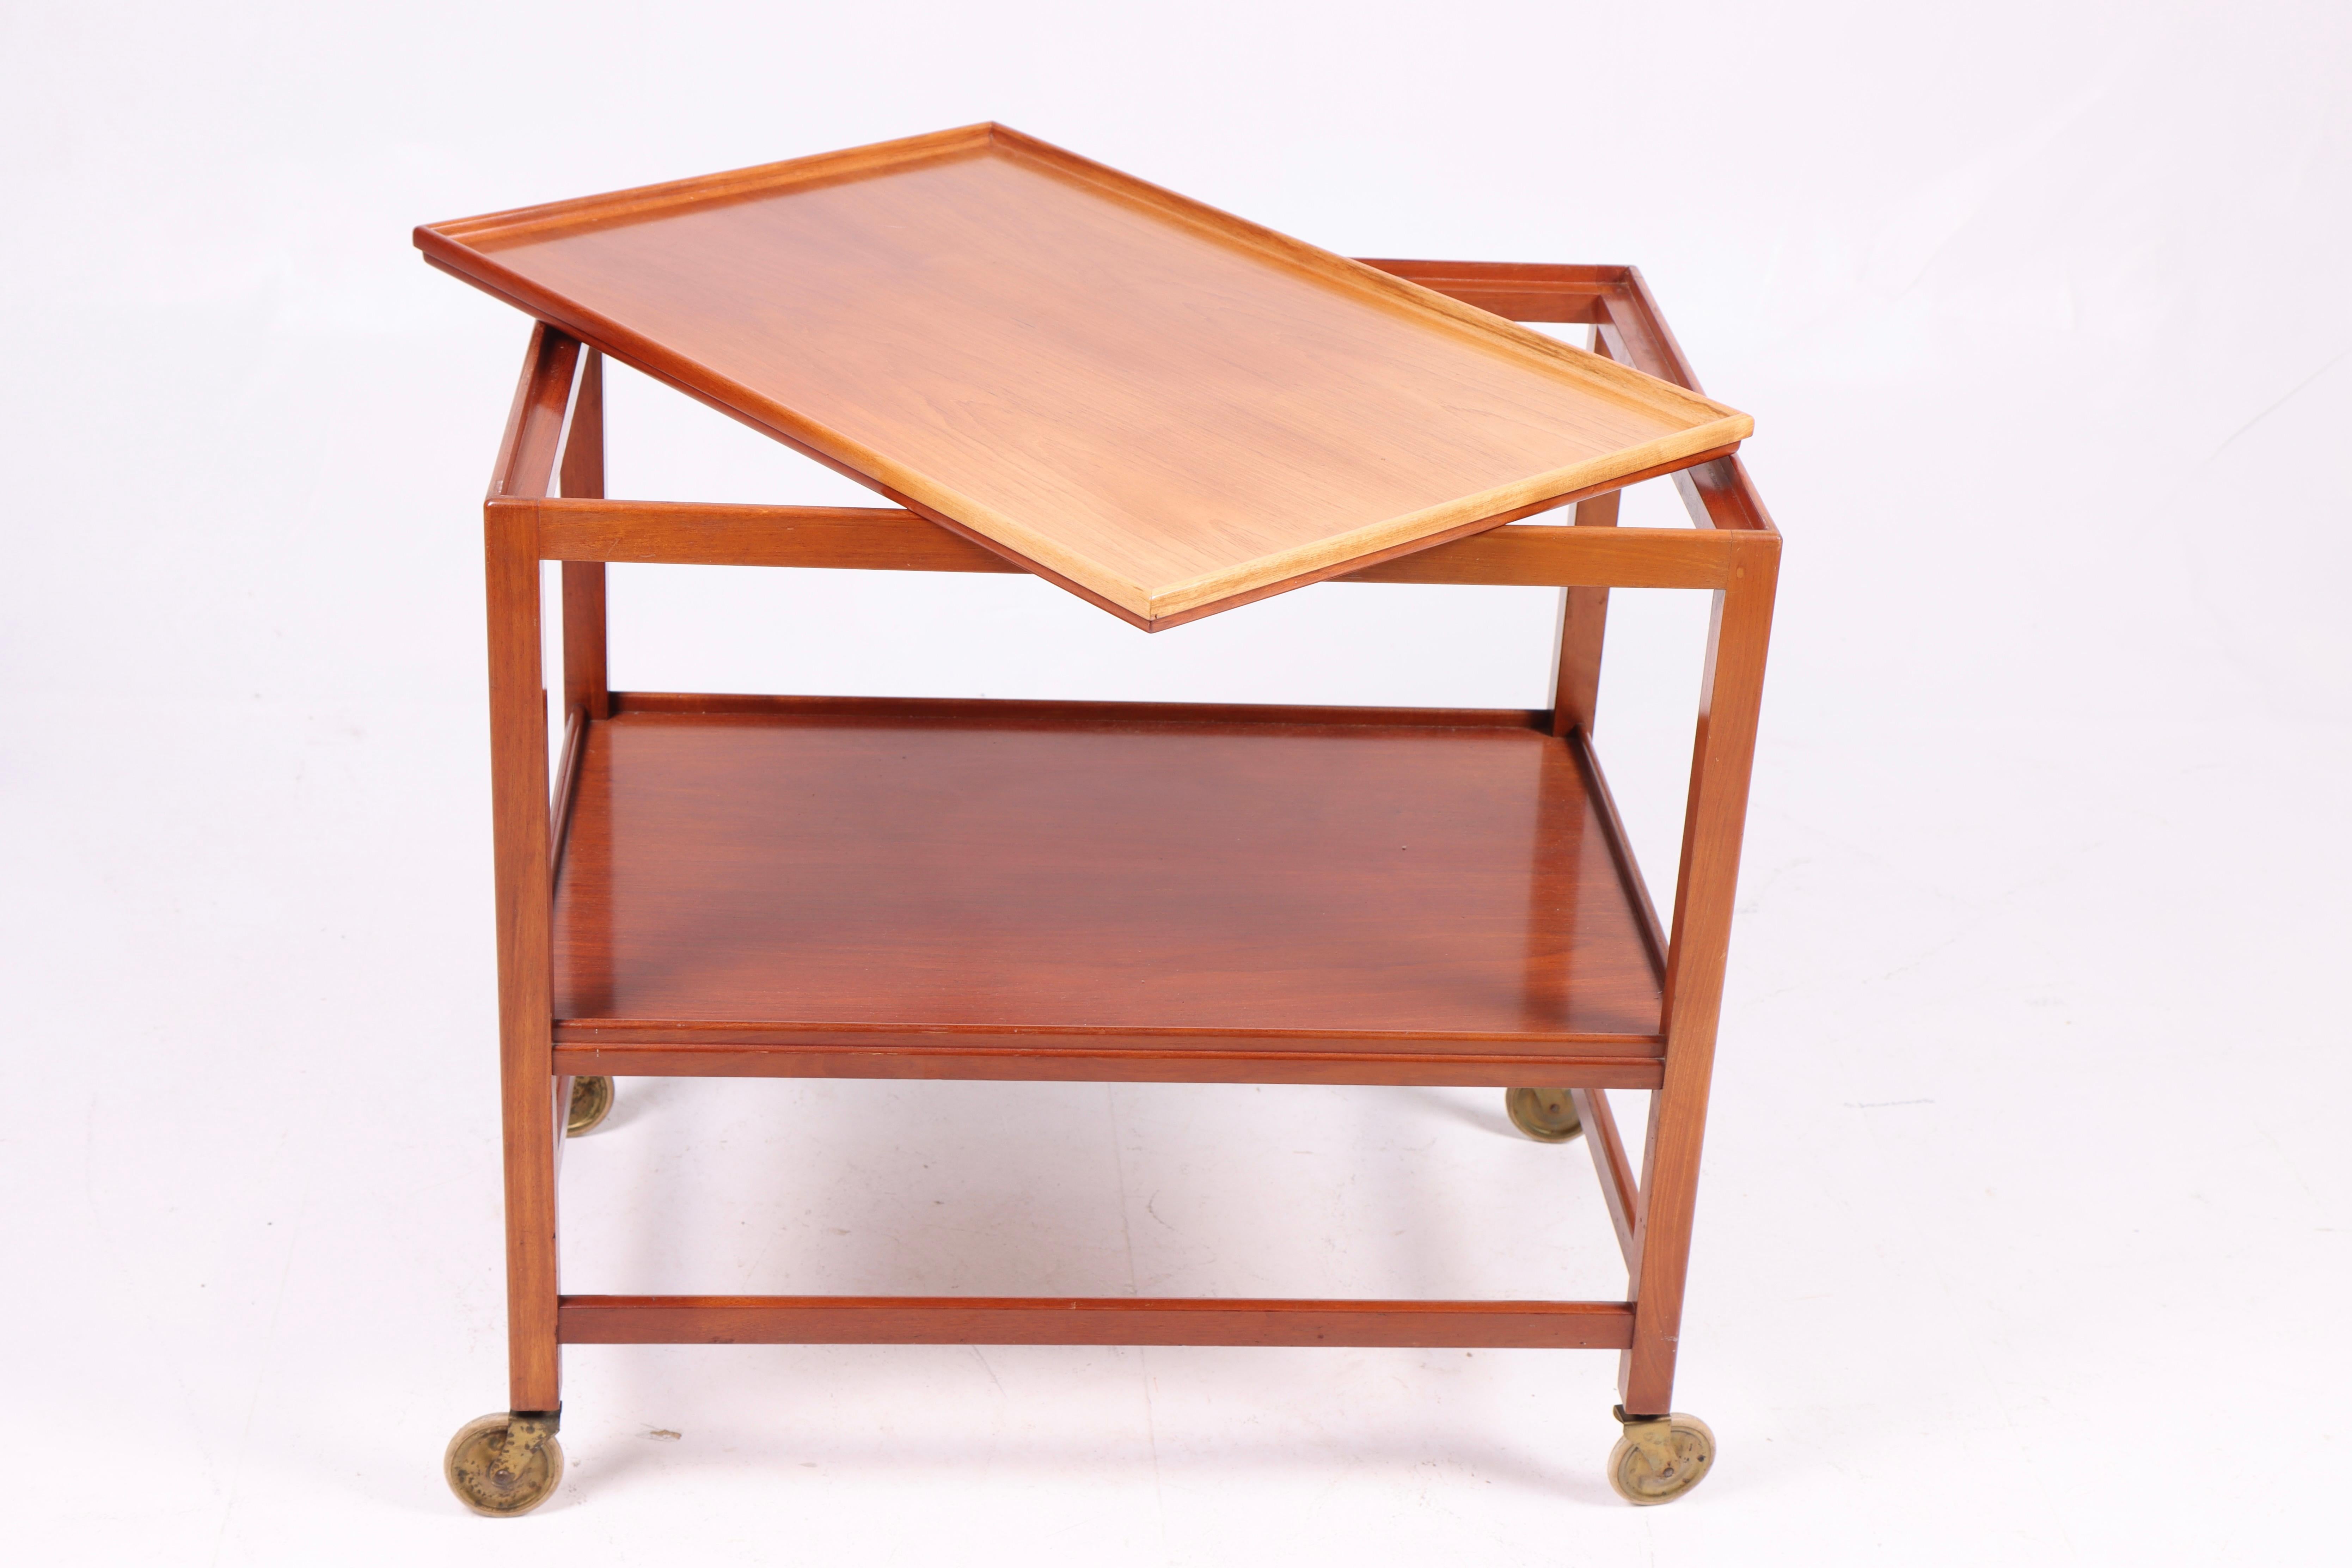 Mid-20th Century Midcentury Bar Cart in Mahogany Designed by Rud Rasmussen, 1950s For Sale